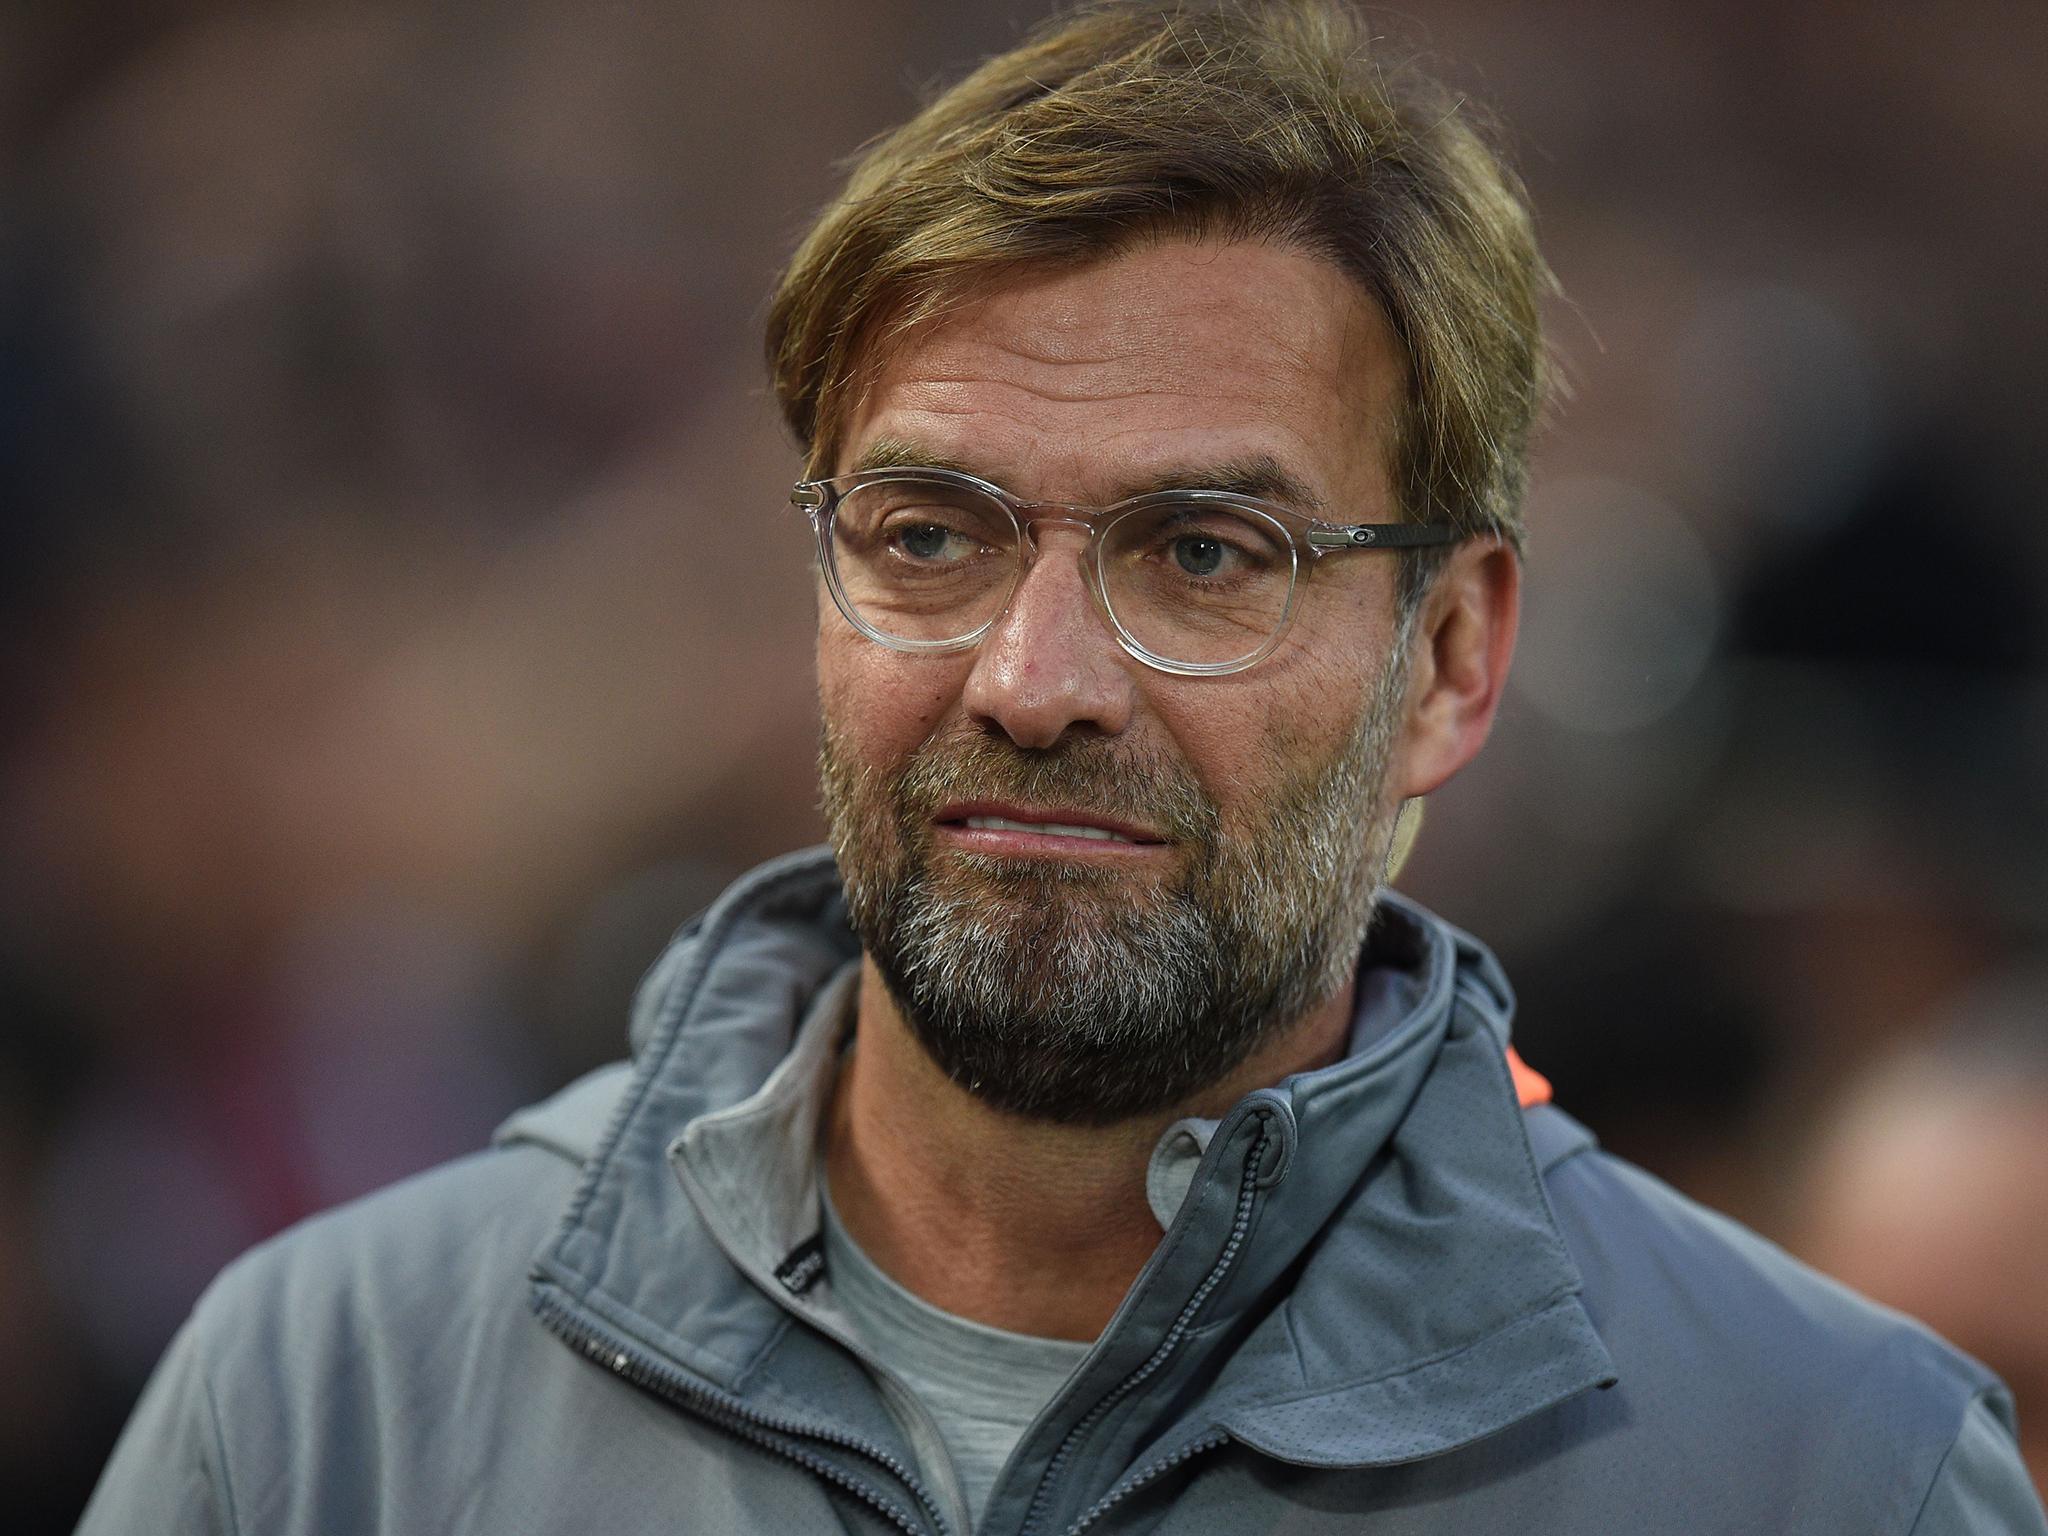 Jürgen Klopp believes fans should 'behave like how you want to be treated yourself'